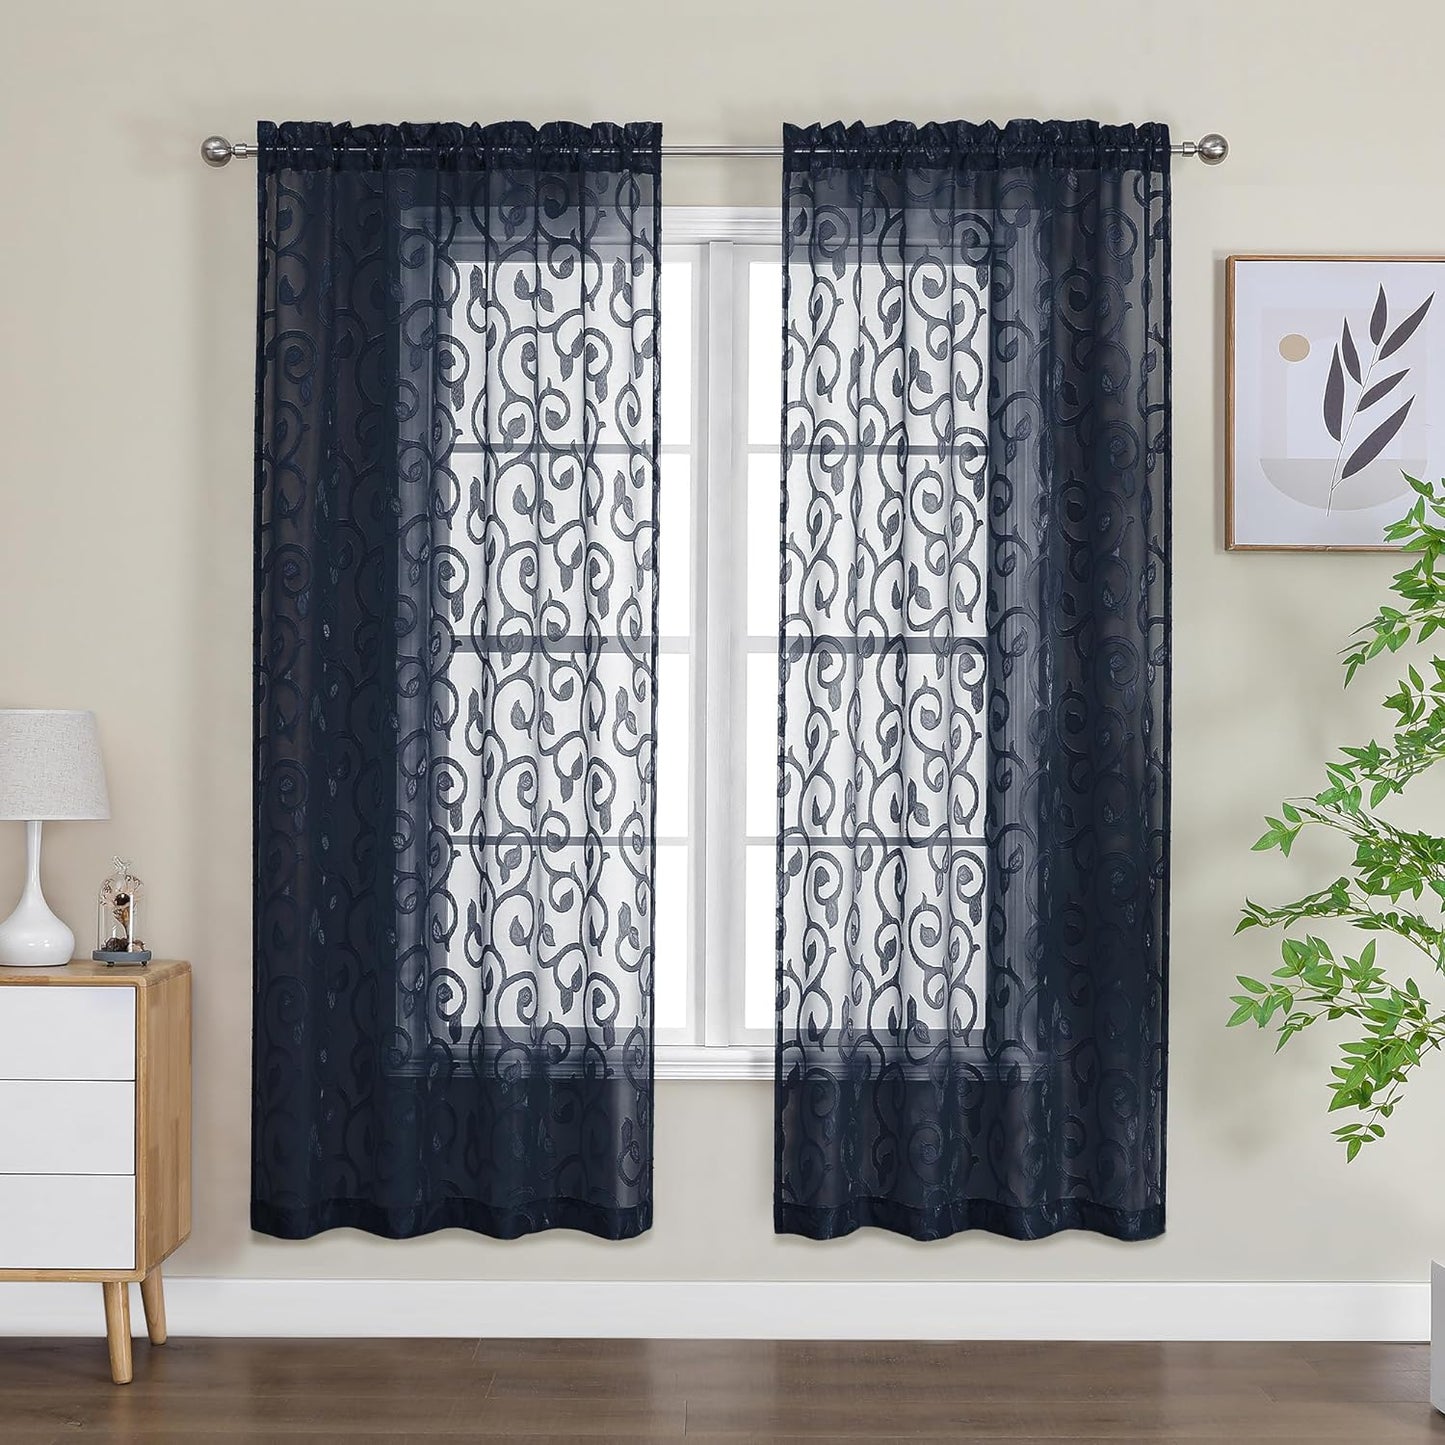 OWENIE Furman Sheer White Curtains 84 Inches Long for Bedroom Living Room 2 Panels Set, White Curtains Jacquard Clip Light Filtering Semi Sheer Curtain Transparent Rod Pocket Window Drapes, 2 Pcs  OWENIE Navy Blue 40W X 63L 